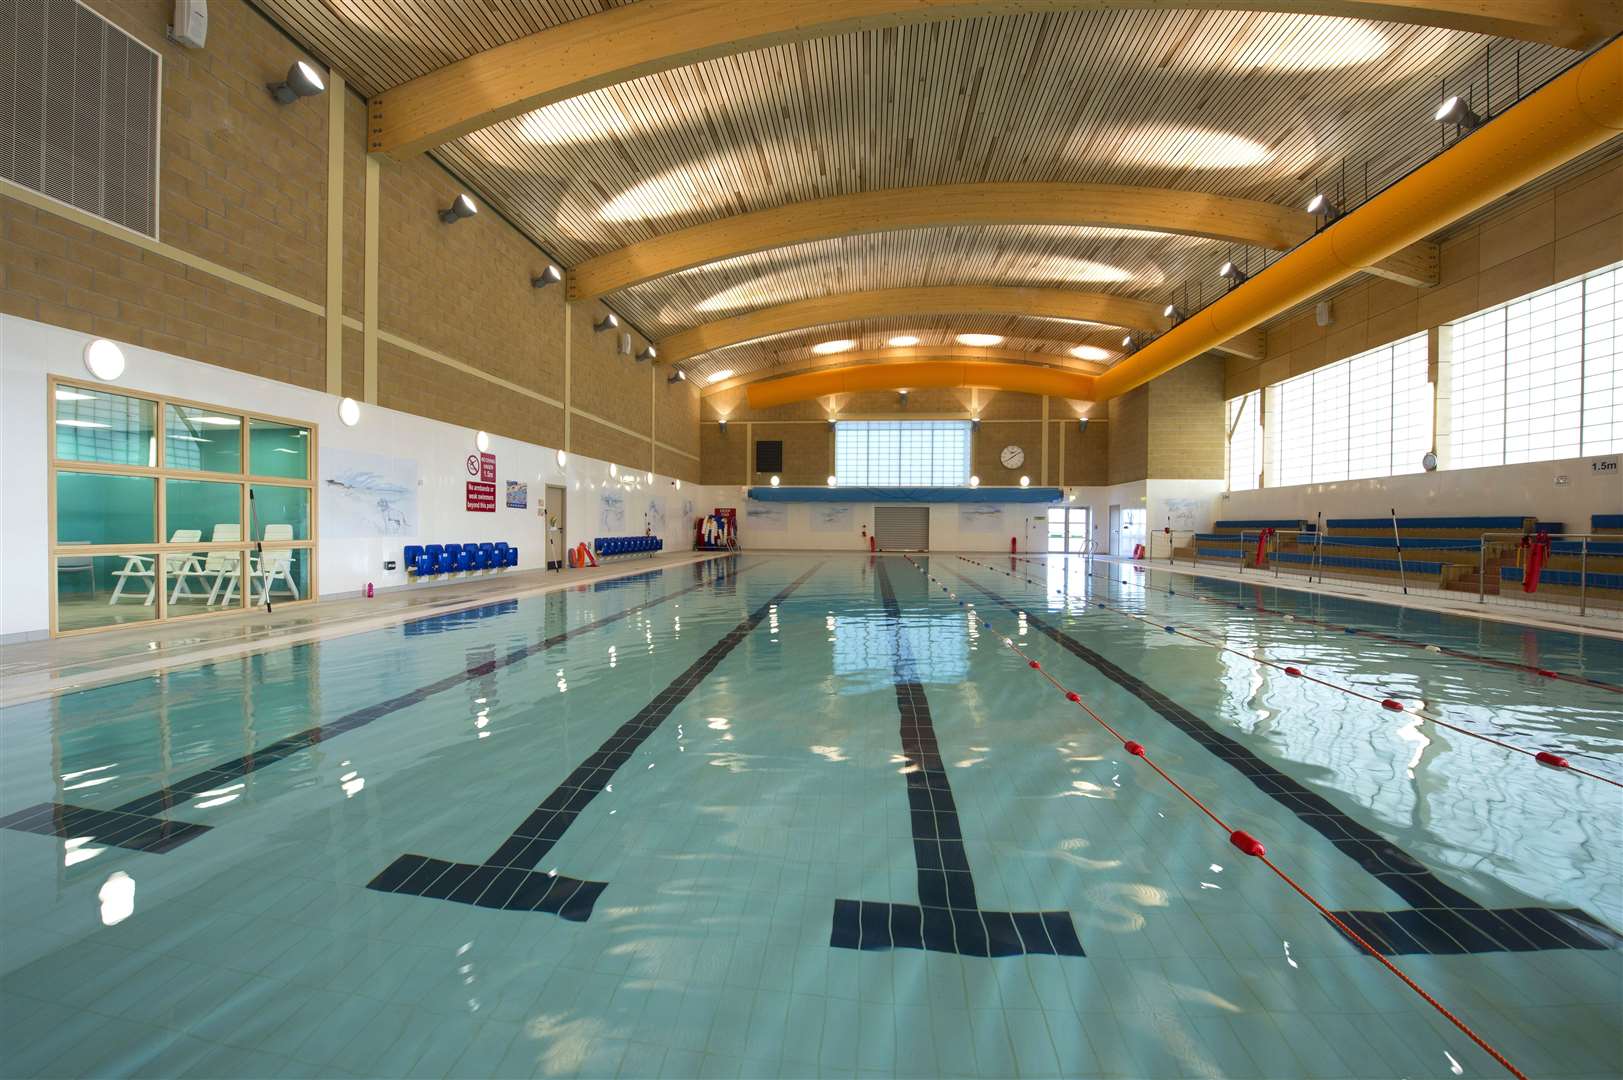 Fraserburgh pool is one of only a very limited number which is set to reopen.